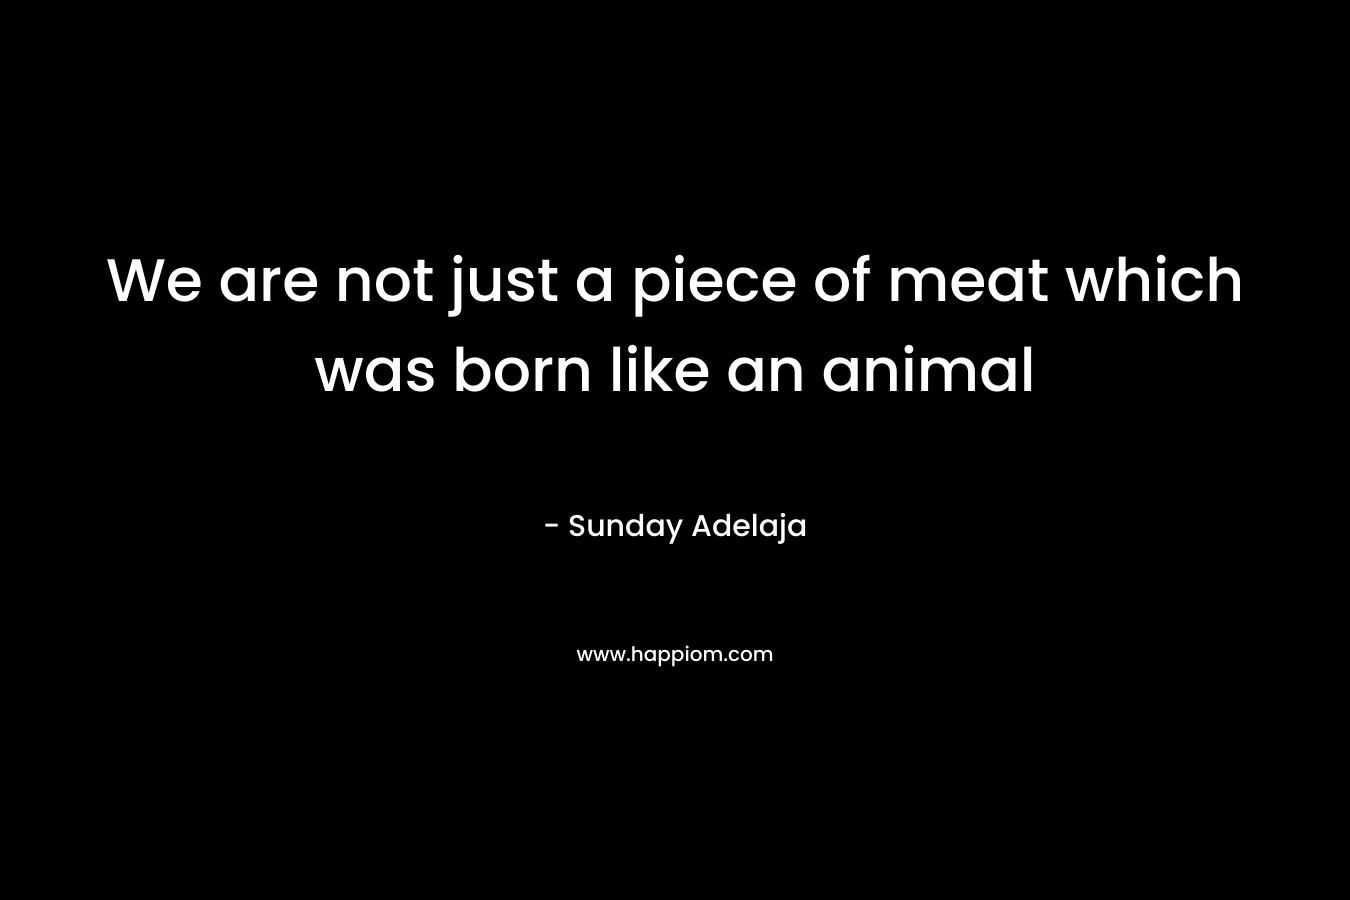 We are not just a piece of meat which was born like an animal